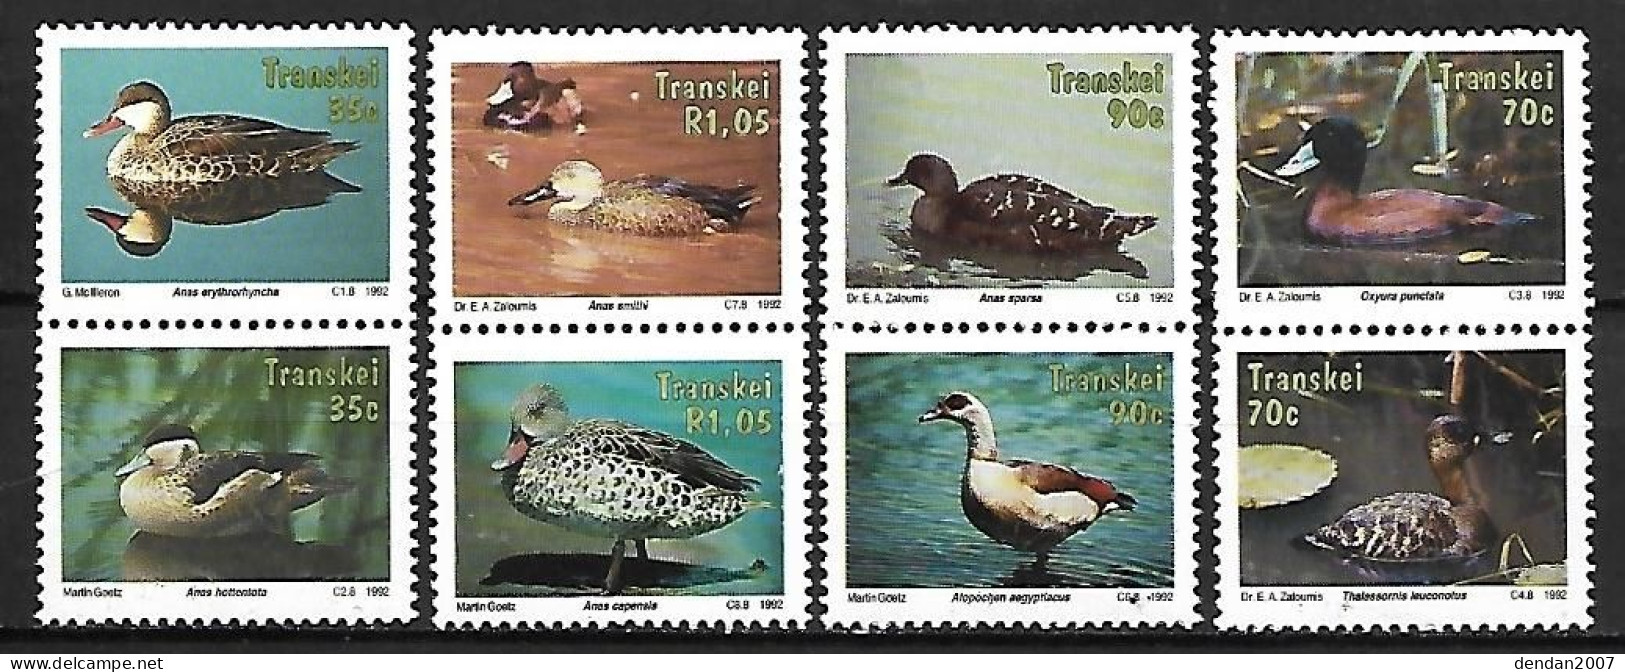 Transkei (South Africa) : MNH ** 1992 Complete Set 8/8 : 8 Different Ducks And Gooses - Aquile & Rapaci Diurni